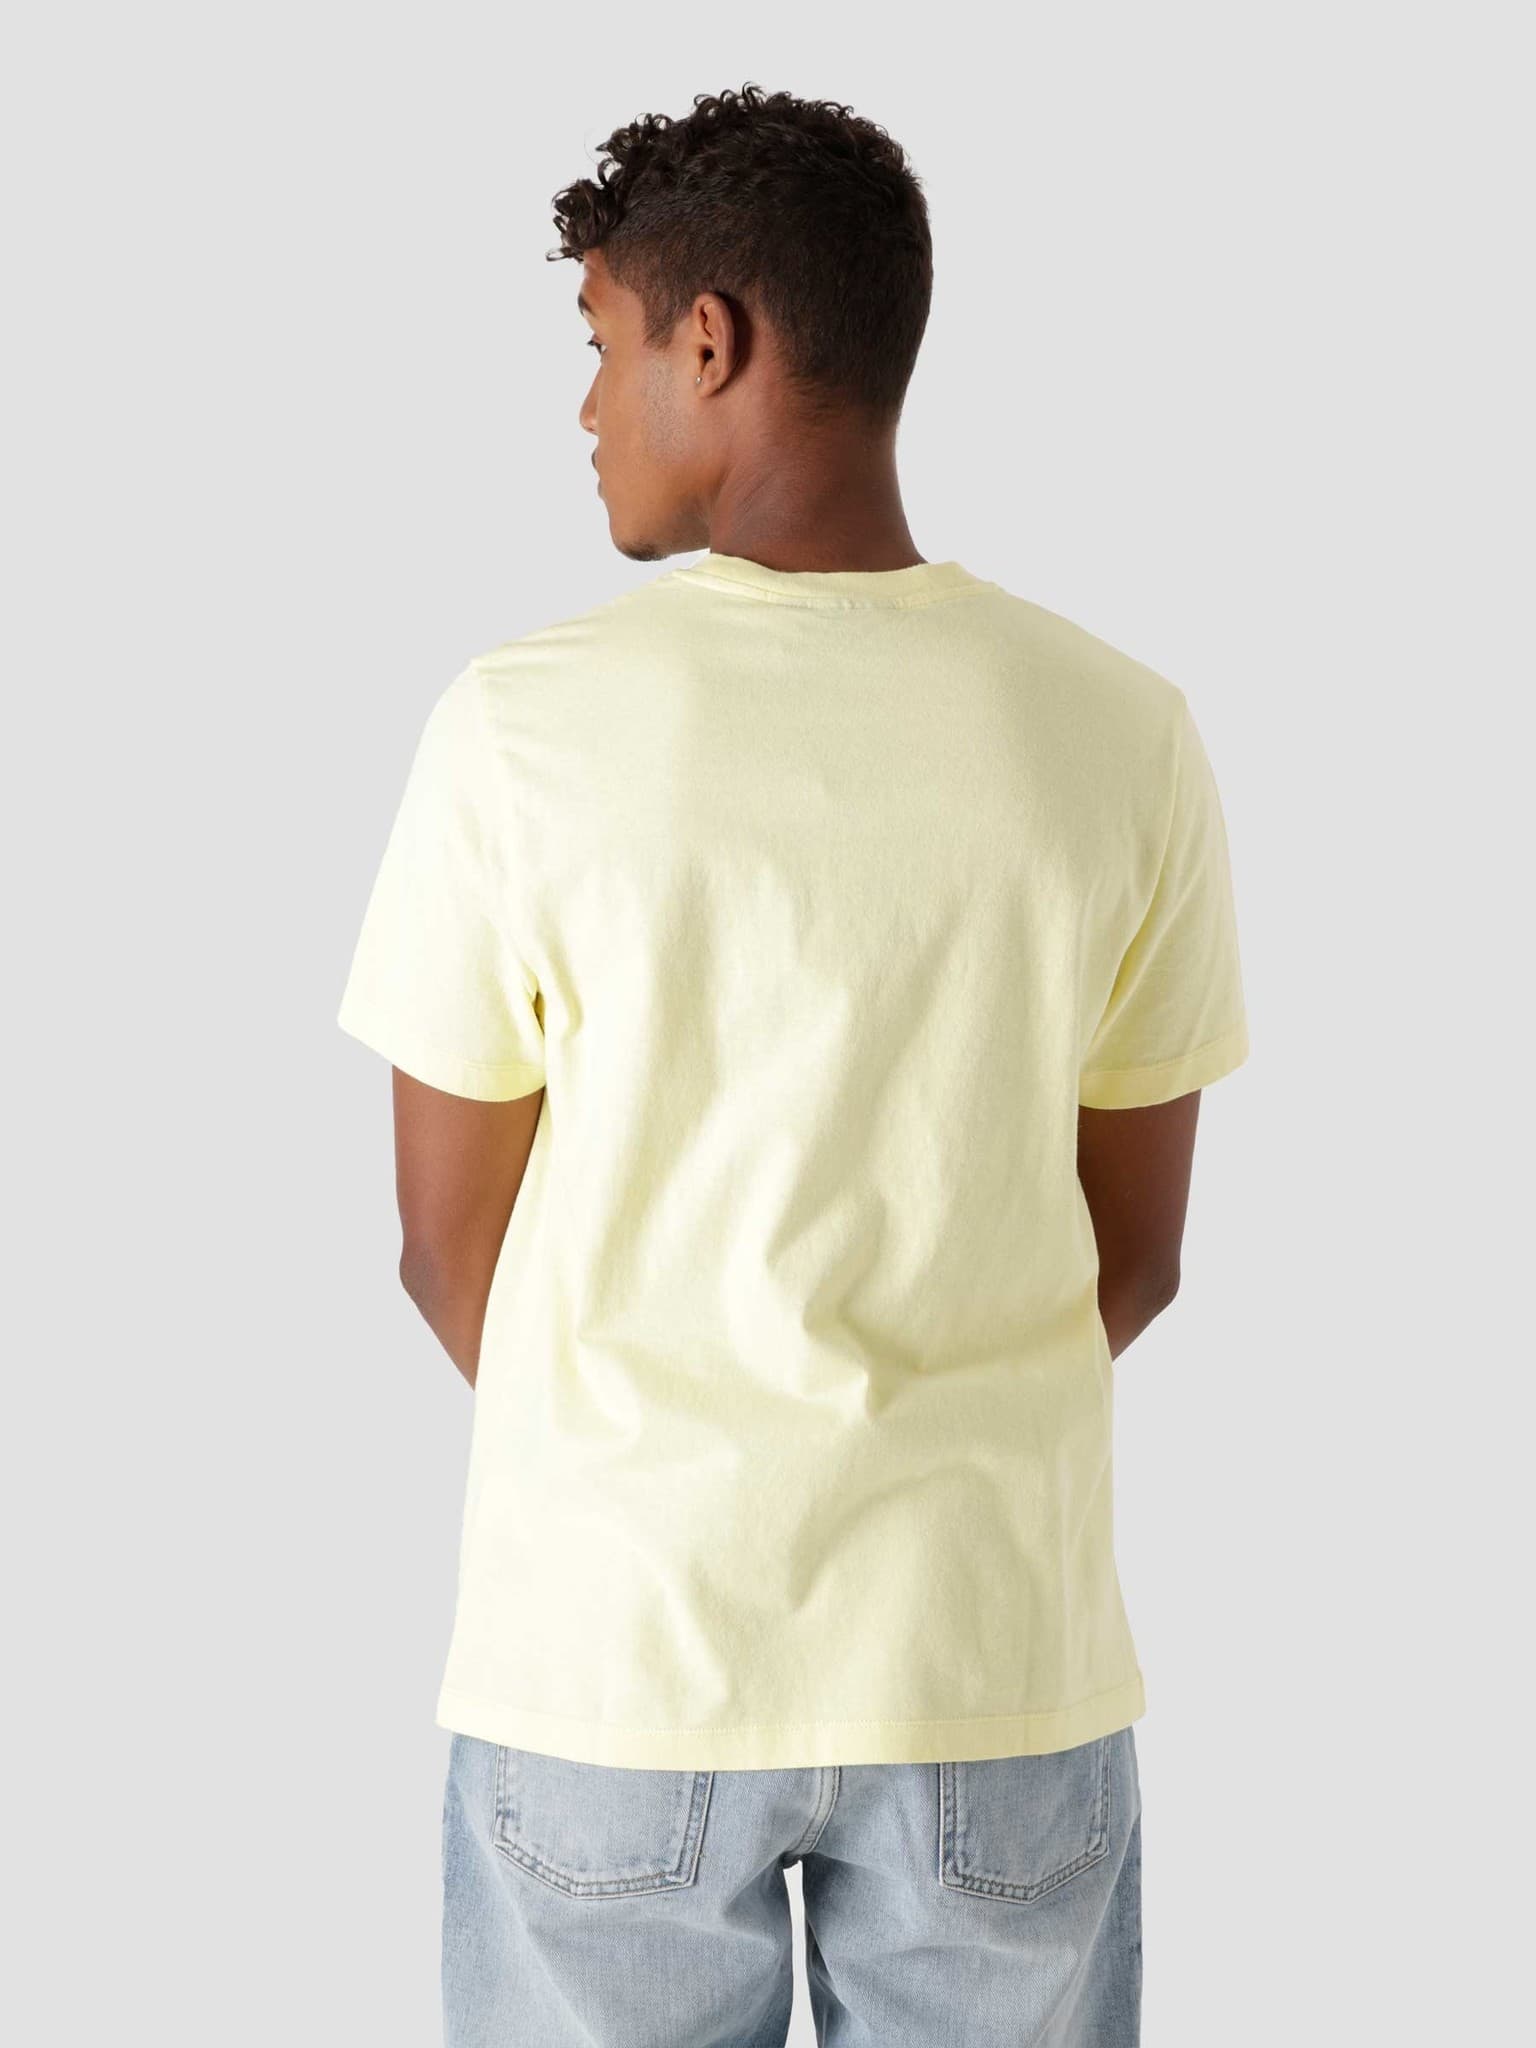 The Chase T-Shirt Yellow 46120